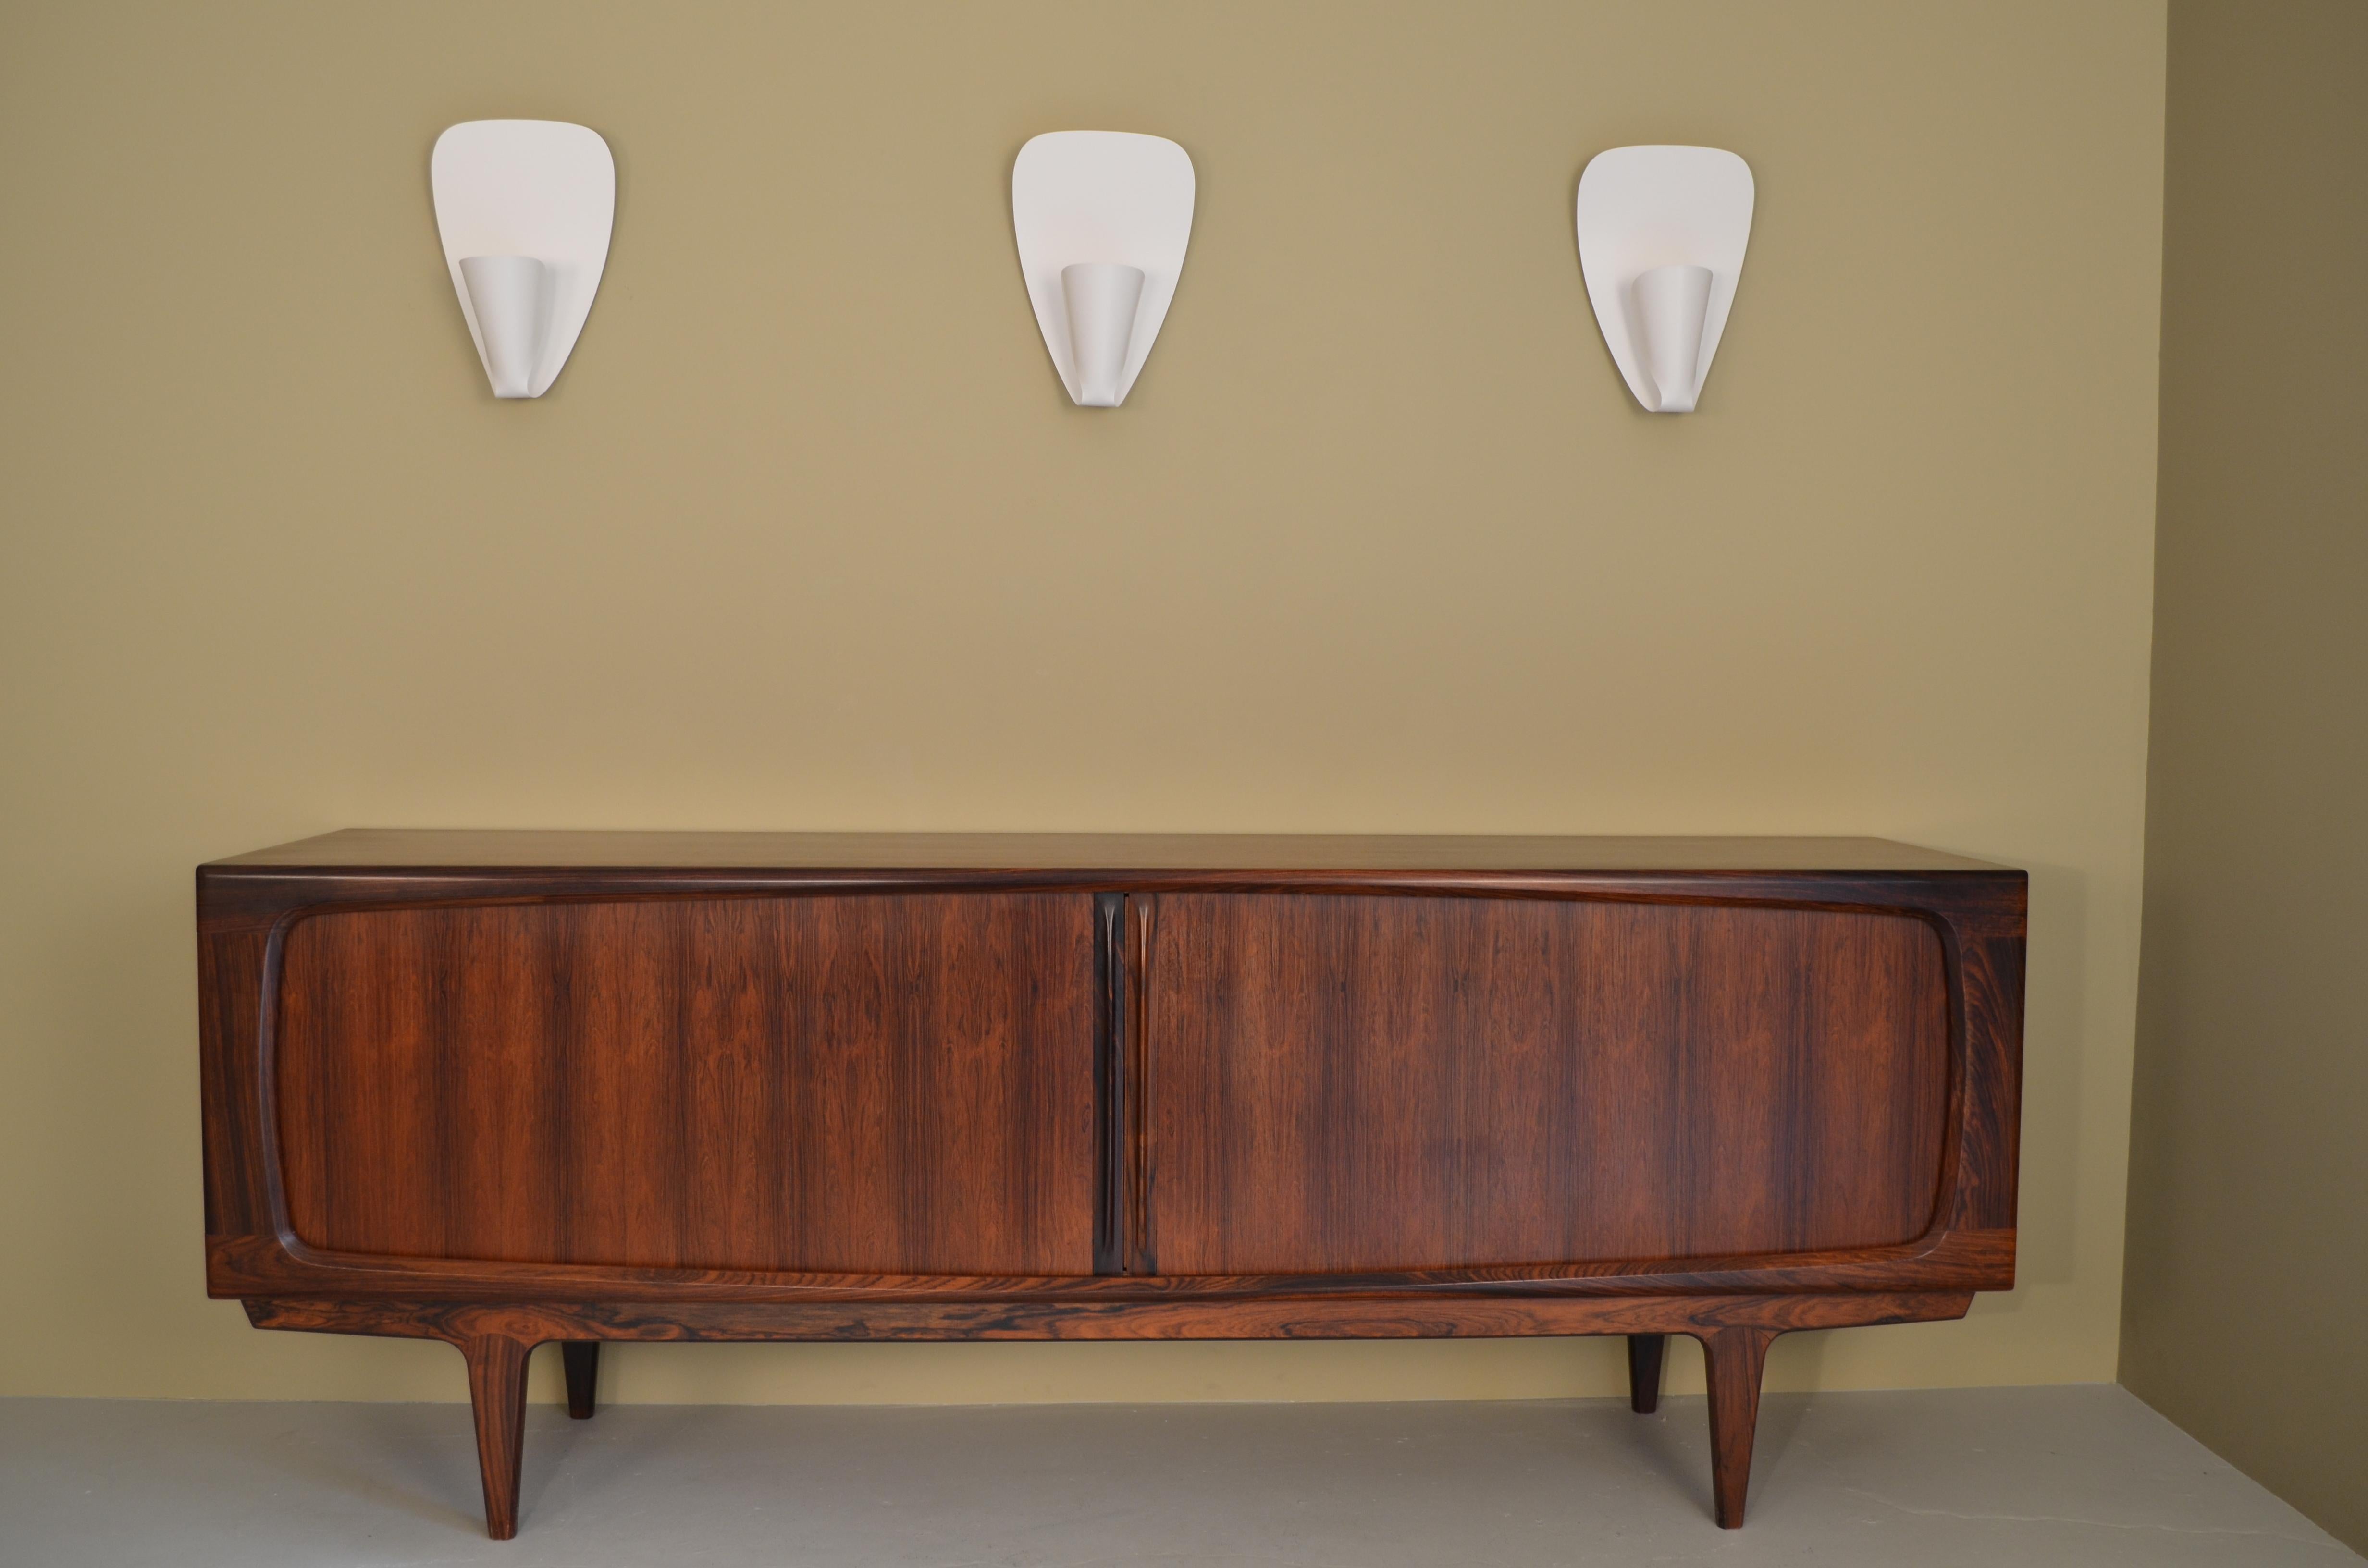 Painted Pair of White Sconces B206 by Michel Buffet - in Stock! For Sale